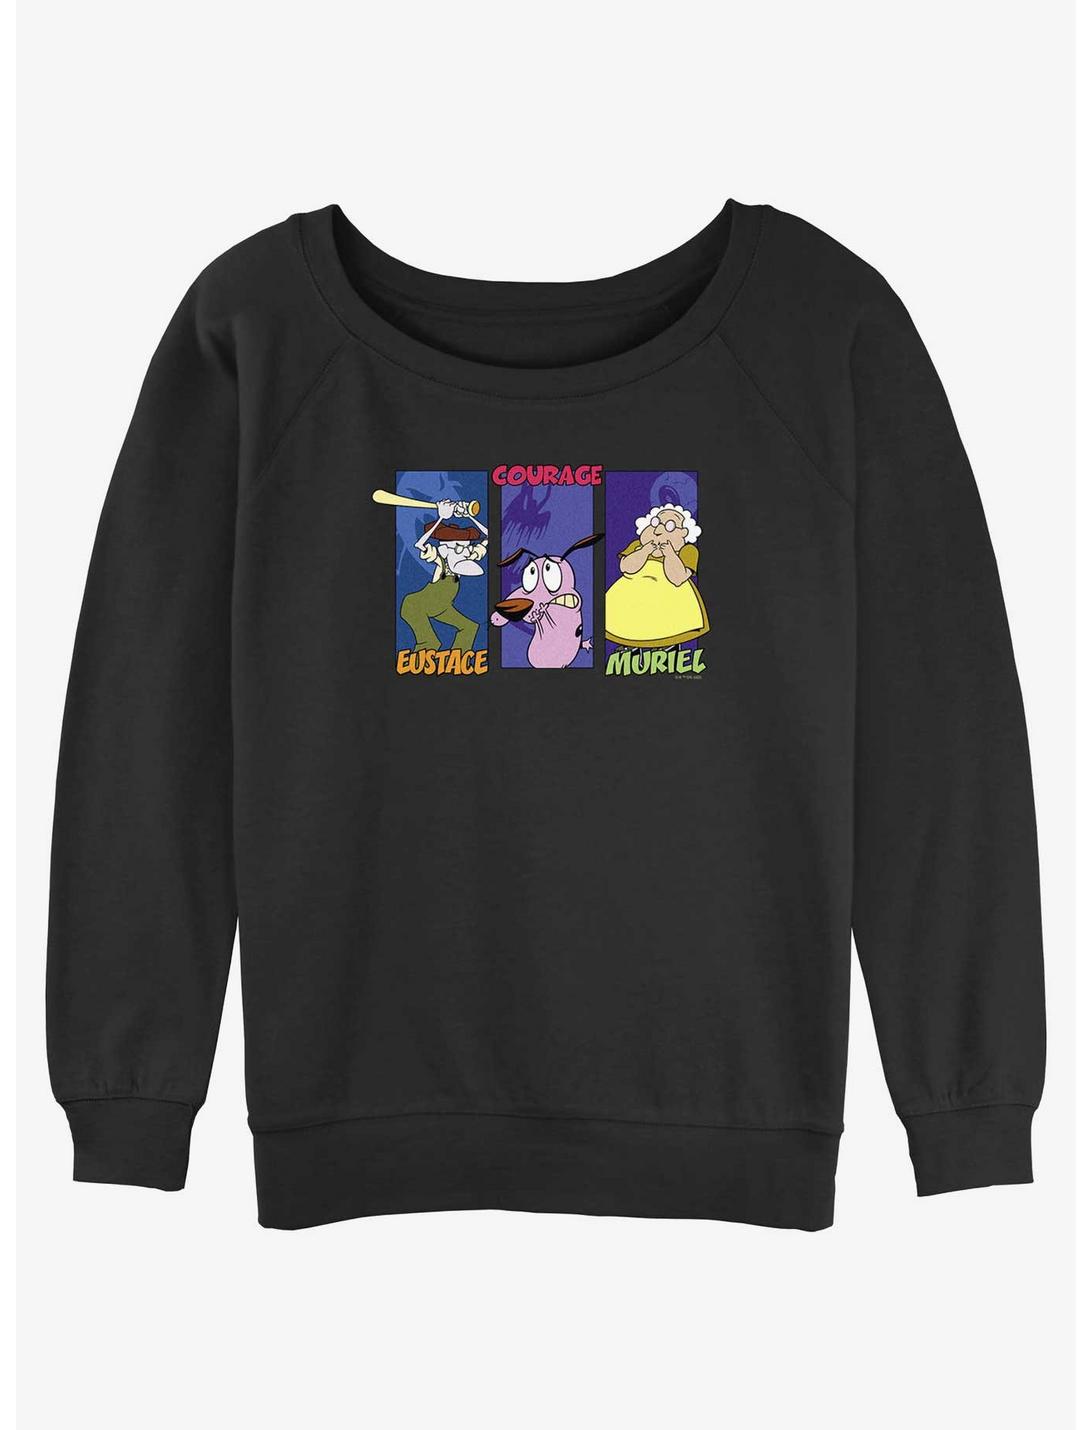 Cartoon Network Courage the Cowardly Dog The Family Eustace, Courage and Muriel Girls Slouchy Sweatshirt, BLACK, hi-res